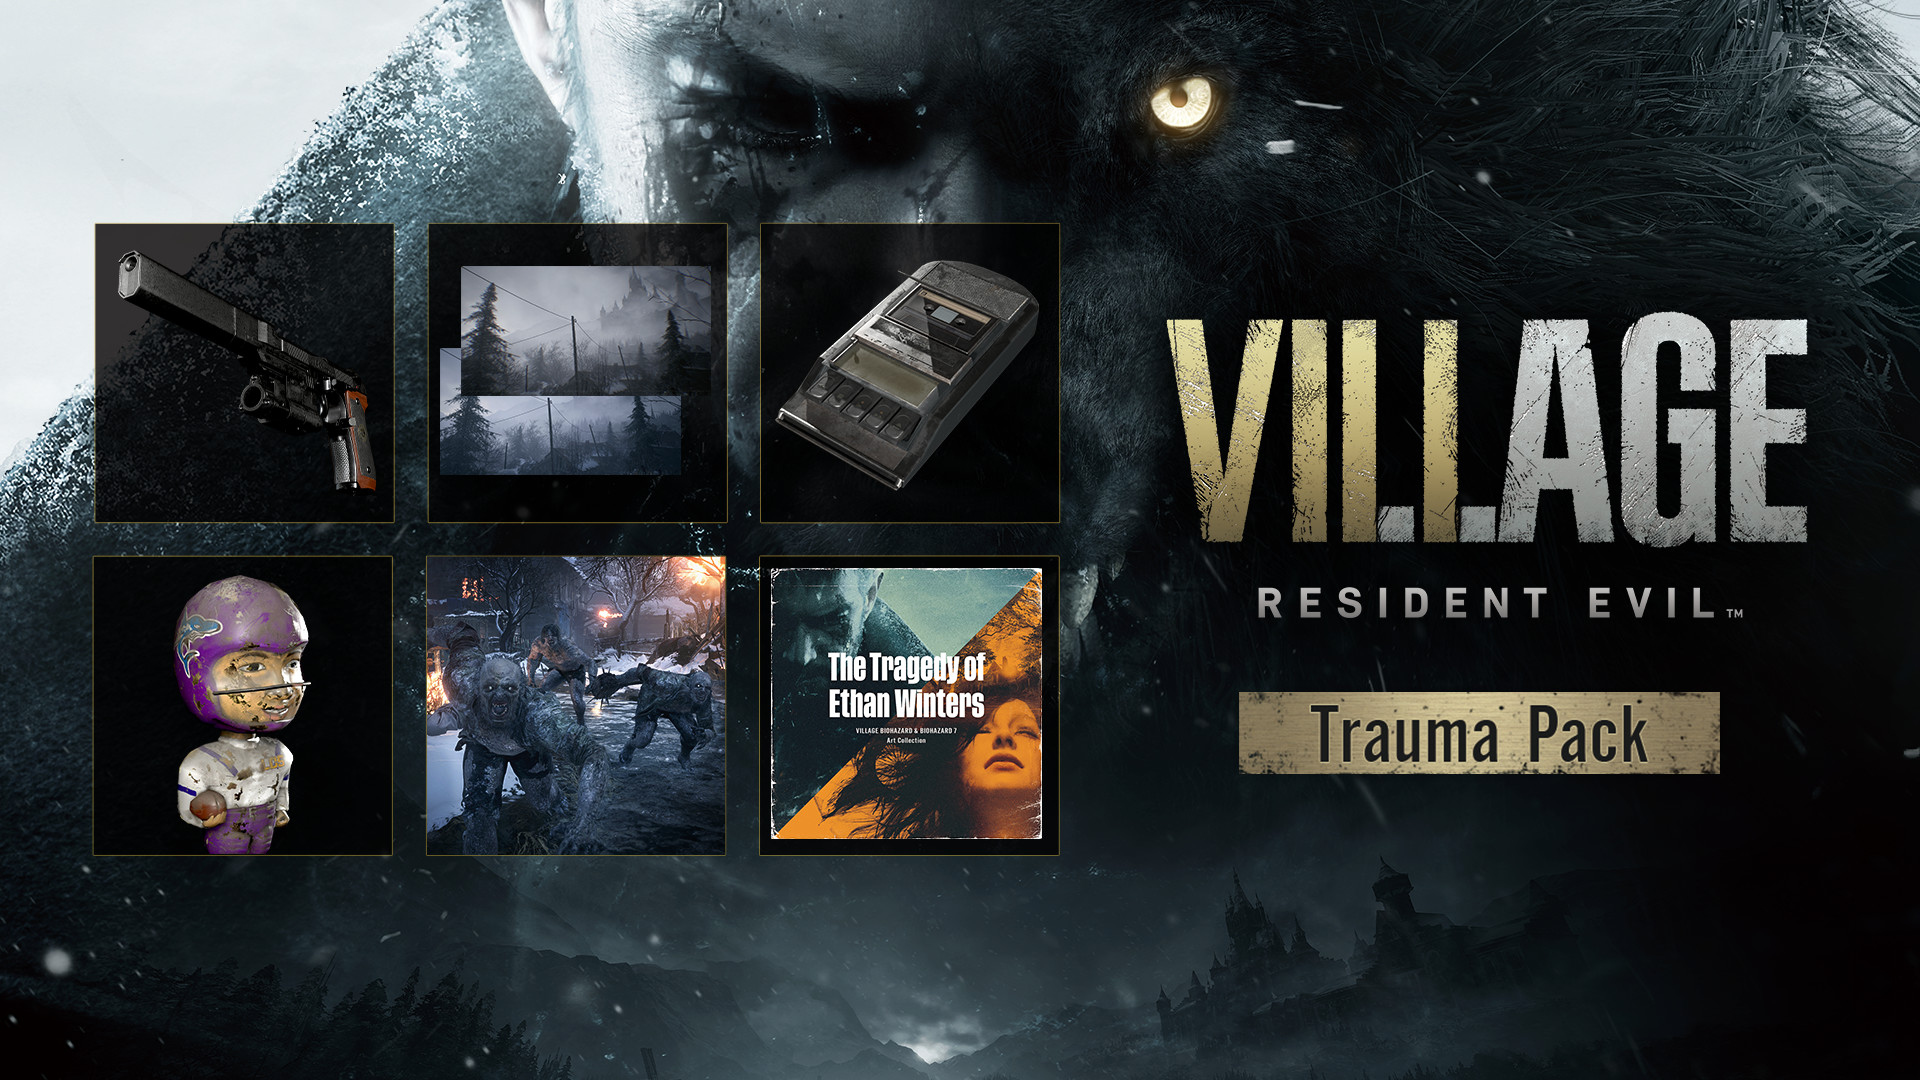 Resident evil village steam is currently фото 40